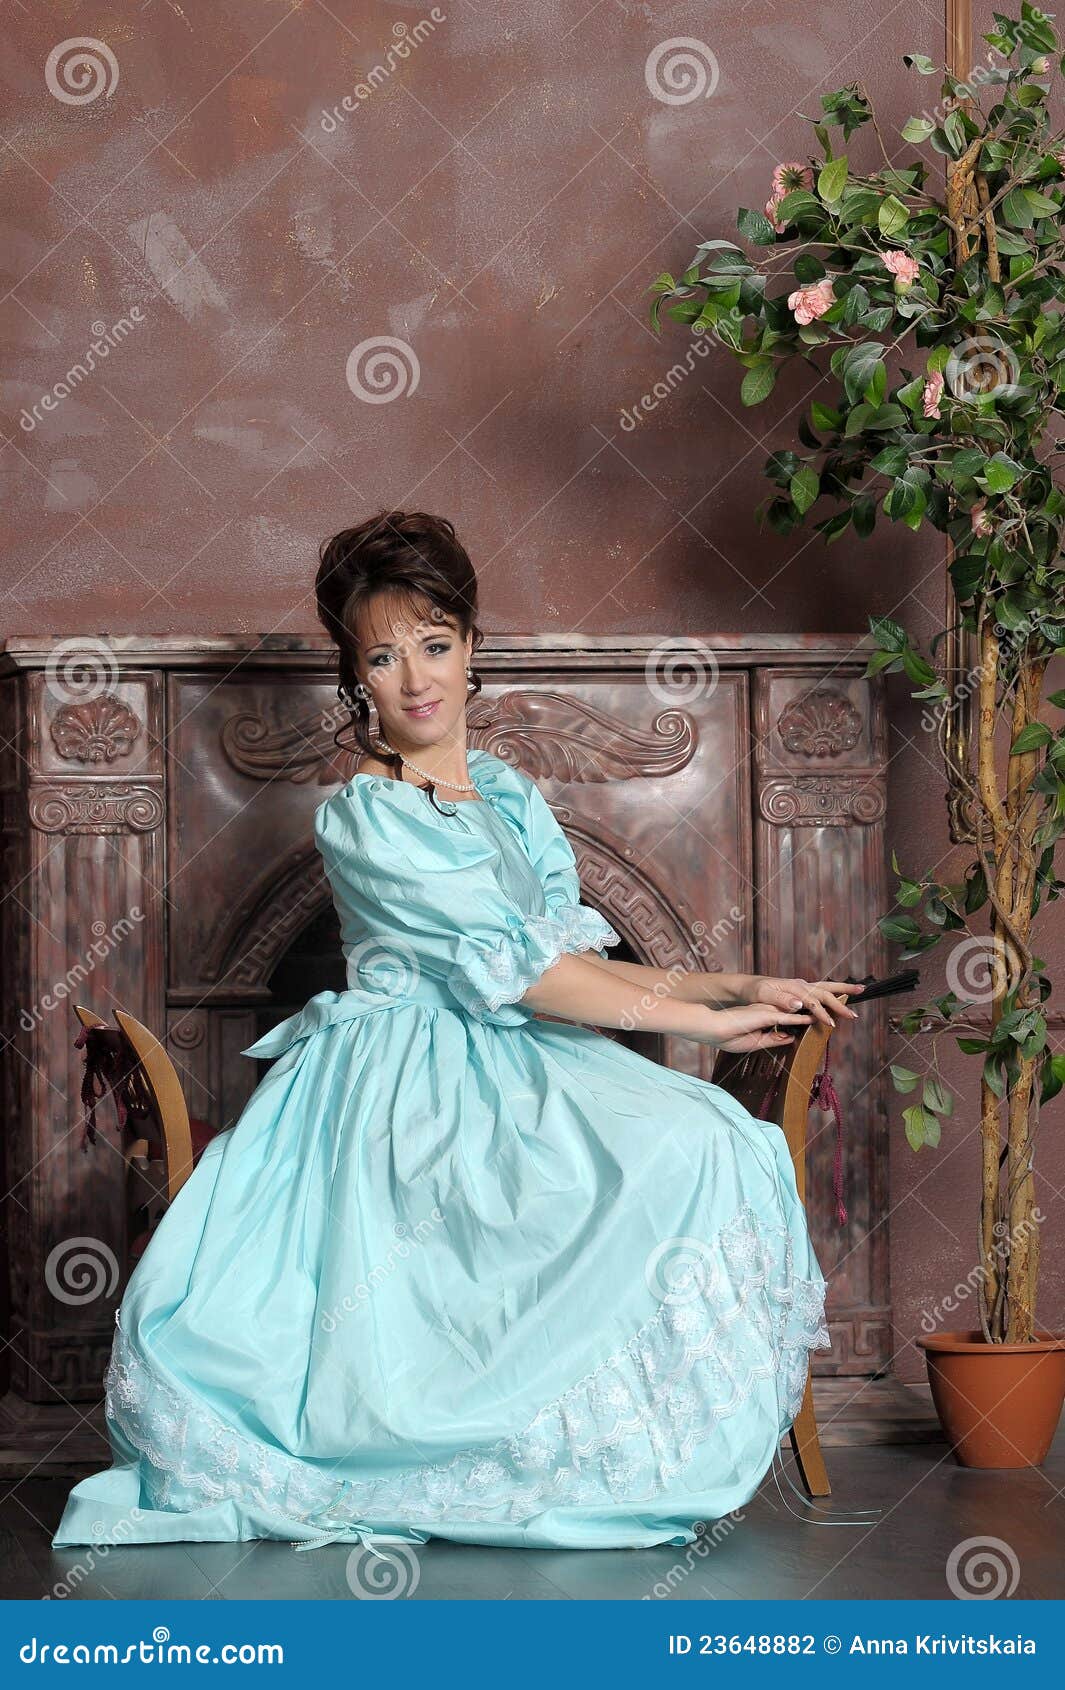 The Young Woman in an Ancient Dress Stock Photo - Image of beauty, girl ...